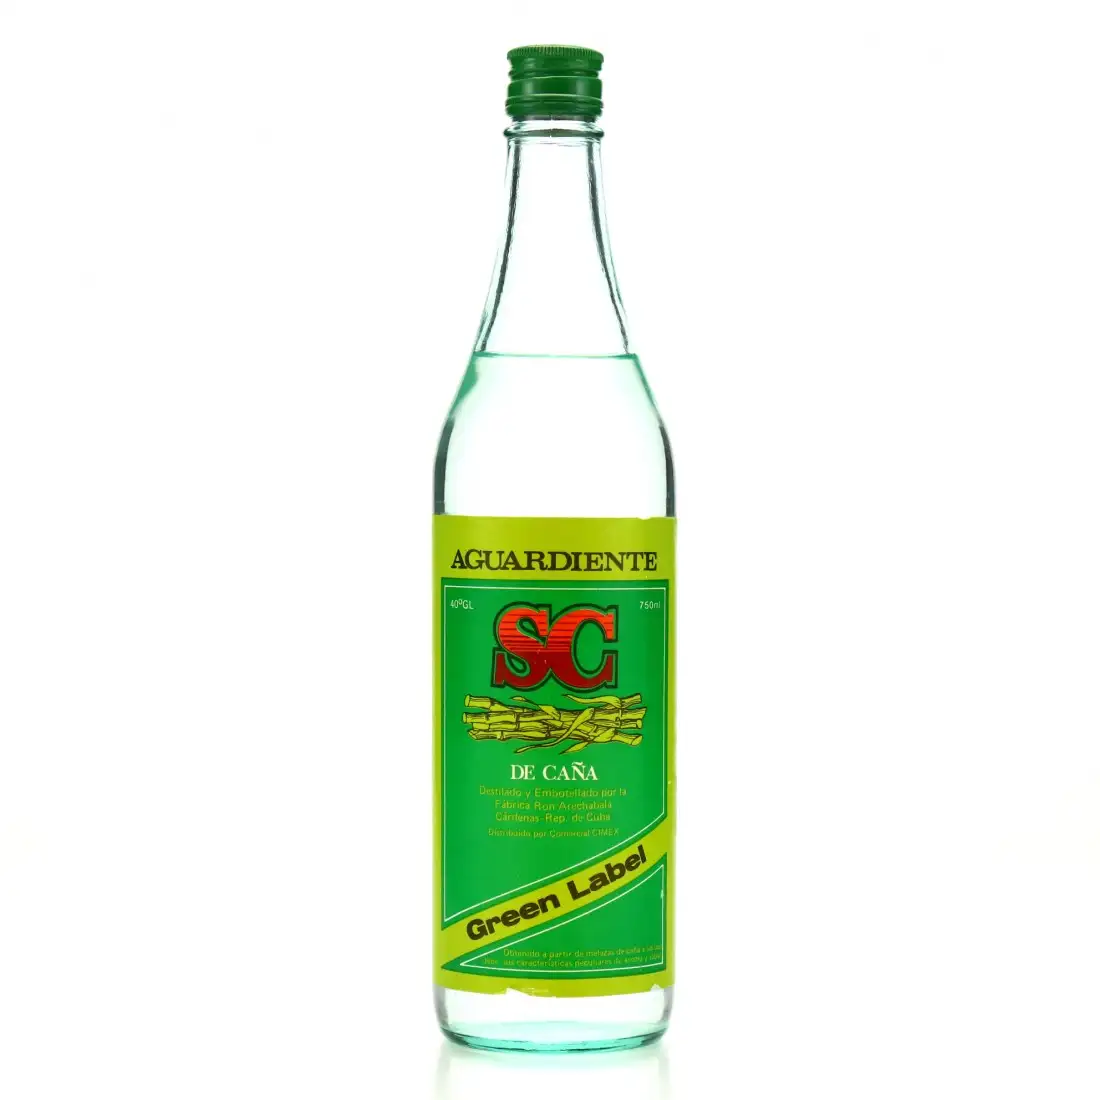 Image of the front of the bottle of the rum SC Aguardiente de Cana Green Label